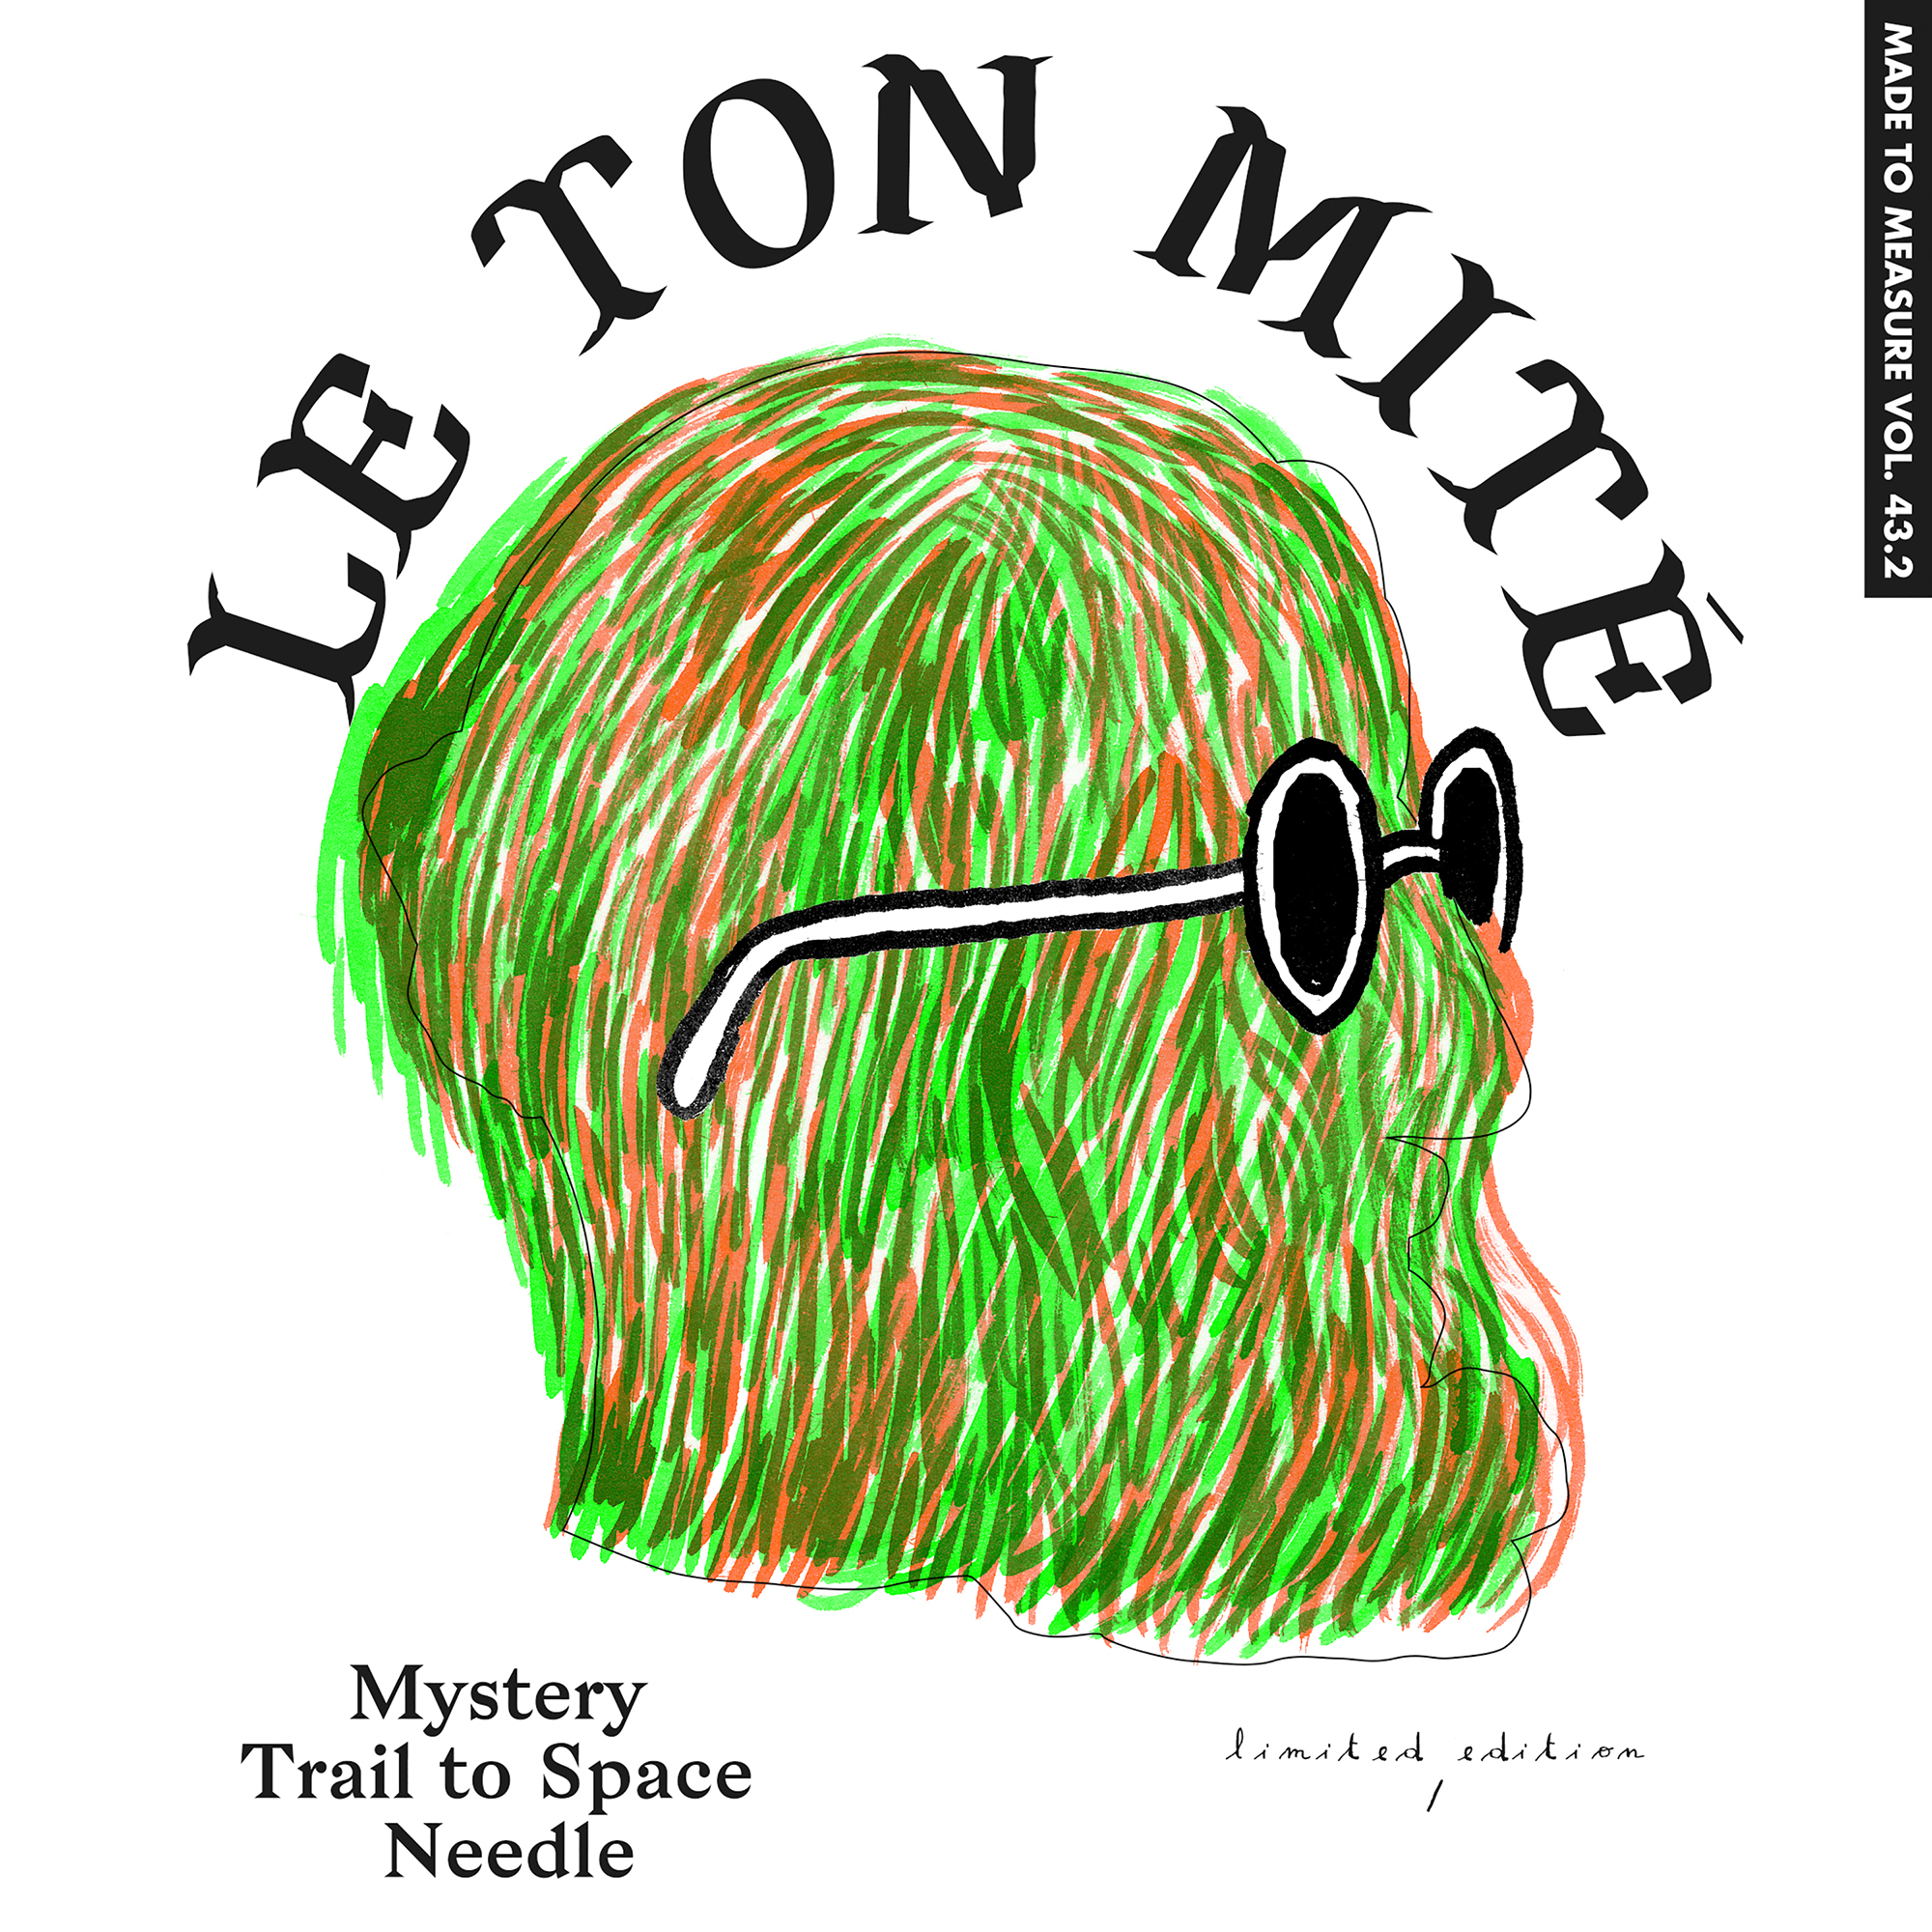 LE TON MITé - Mystery Trail to Space Needle